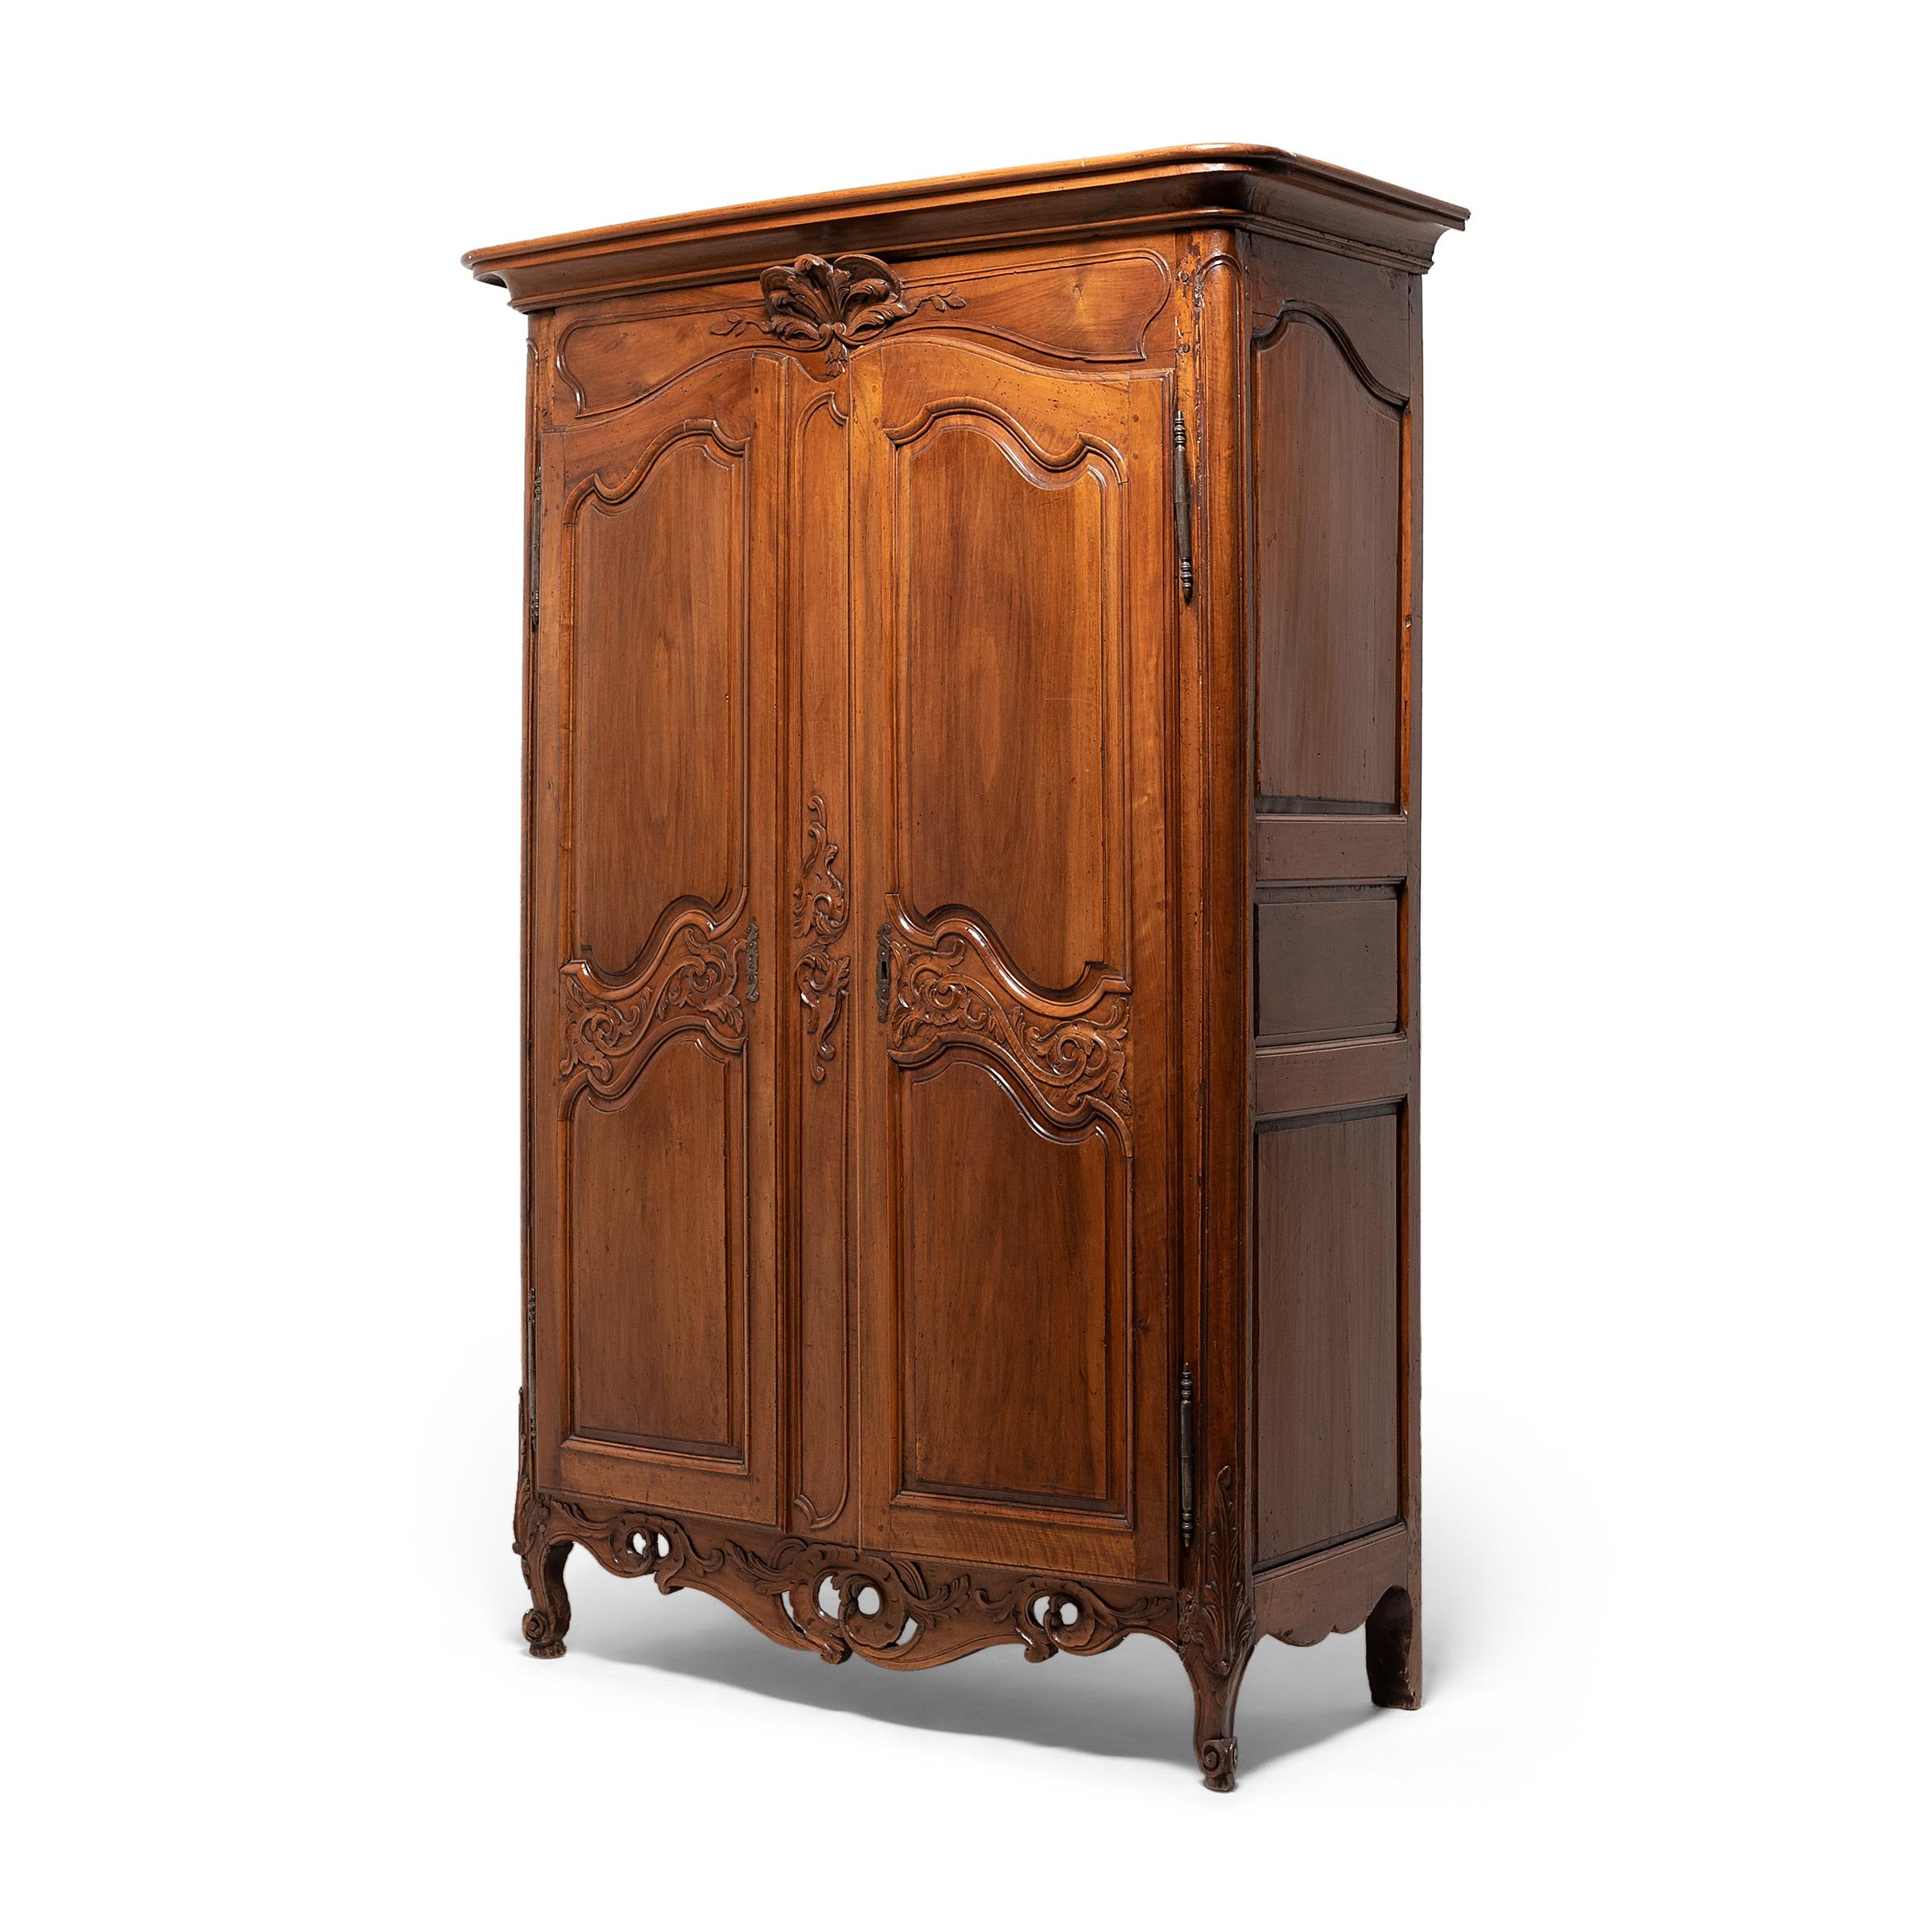 This elegant French armoire dates to the mid- to late-18th century and wonderfully exemplifies the French Provincial and Louis XV styles. The cabinet front is beautifully decorated with cartouche panels framed with beaded edging and interspersed